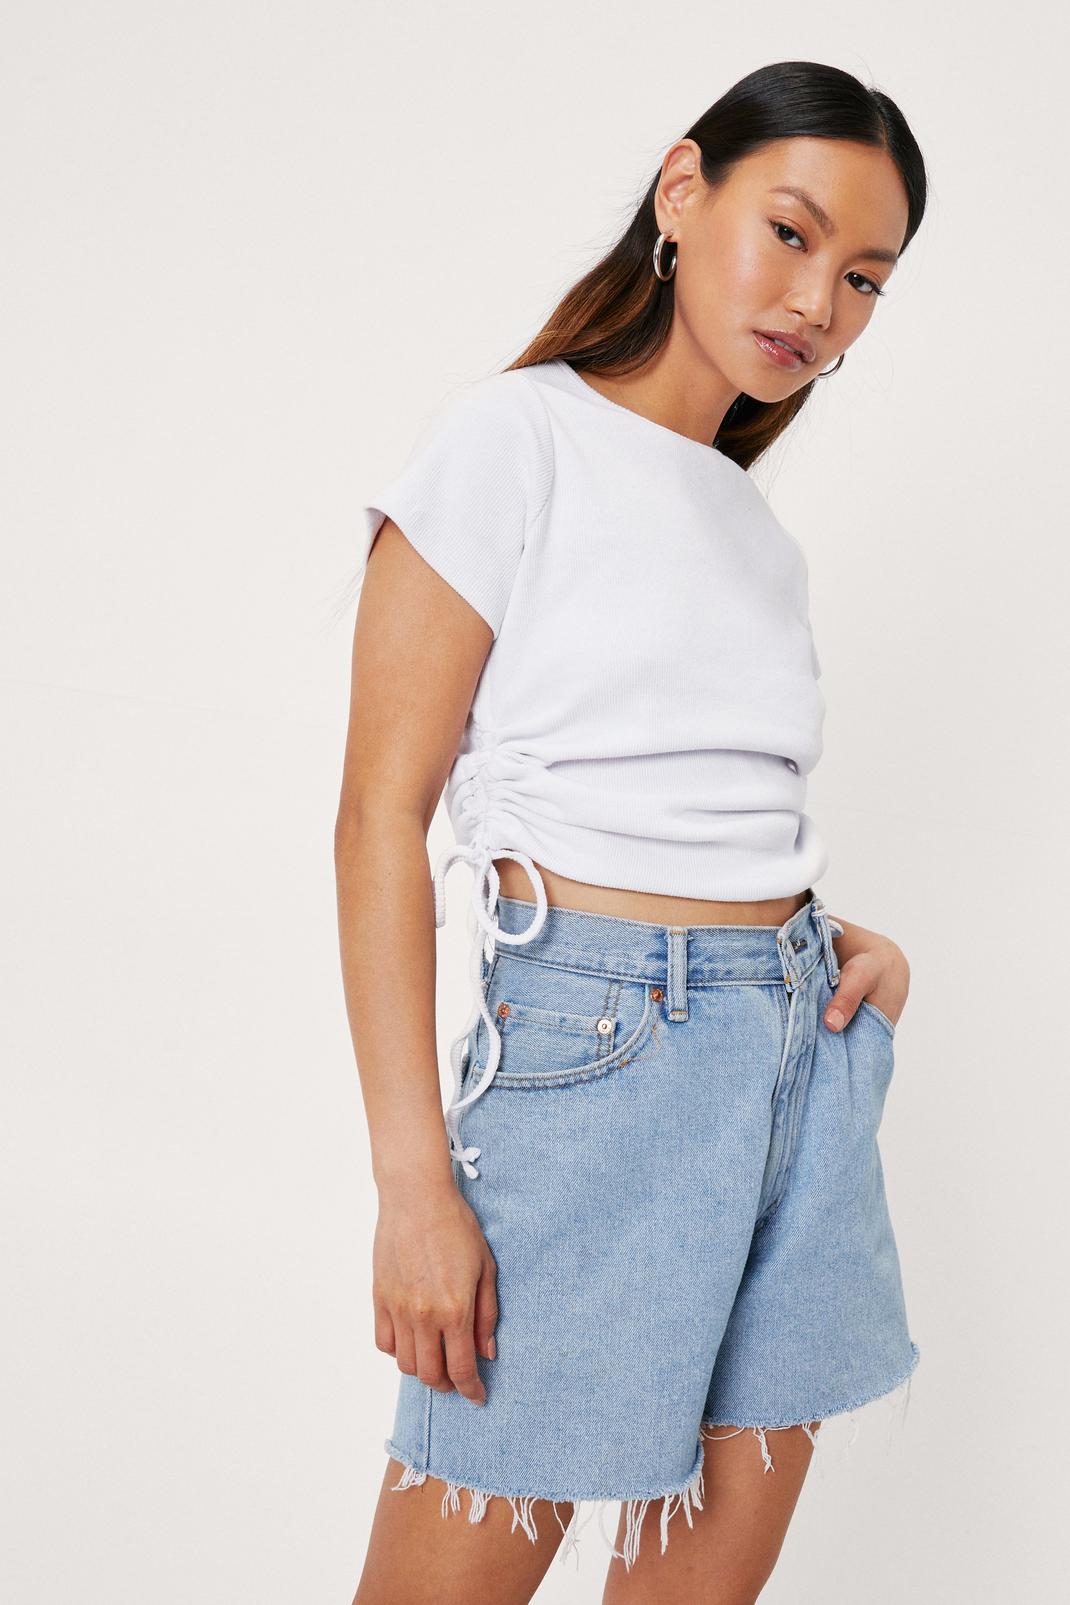 Women's Rib Ruched Side Tee in White